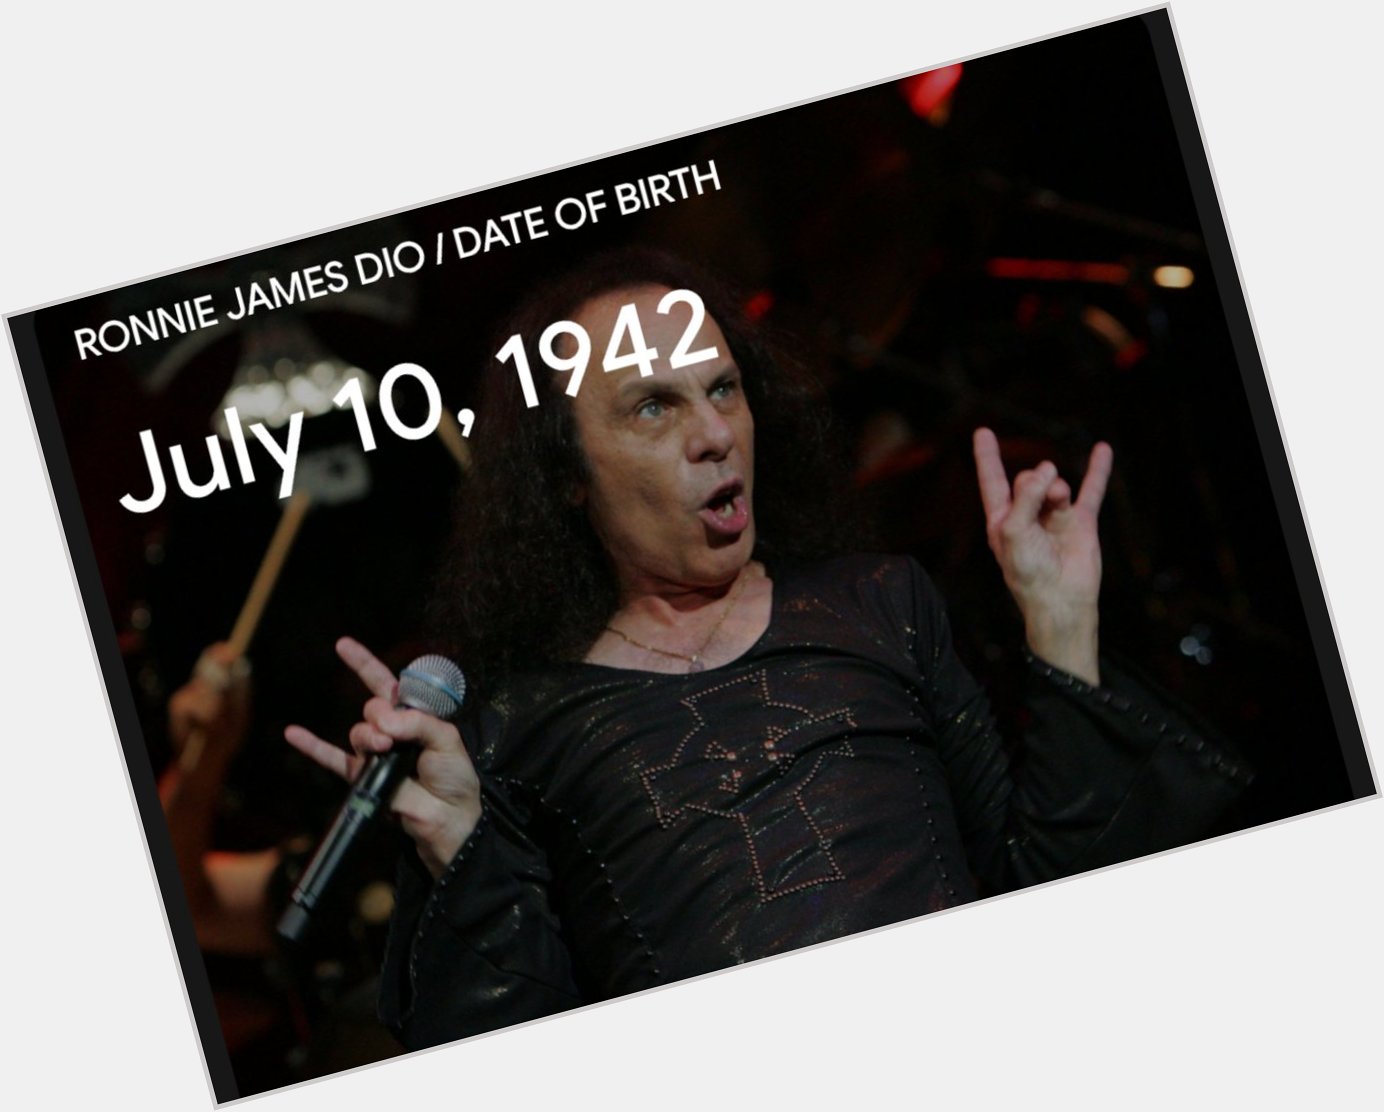 HAPPY BIRTHDAY TO GOD HIMSELF RONNIE JAMES DIO MAY HE ROCK IN PEACE      